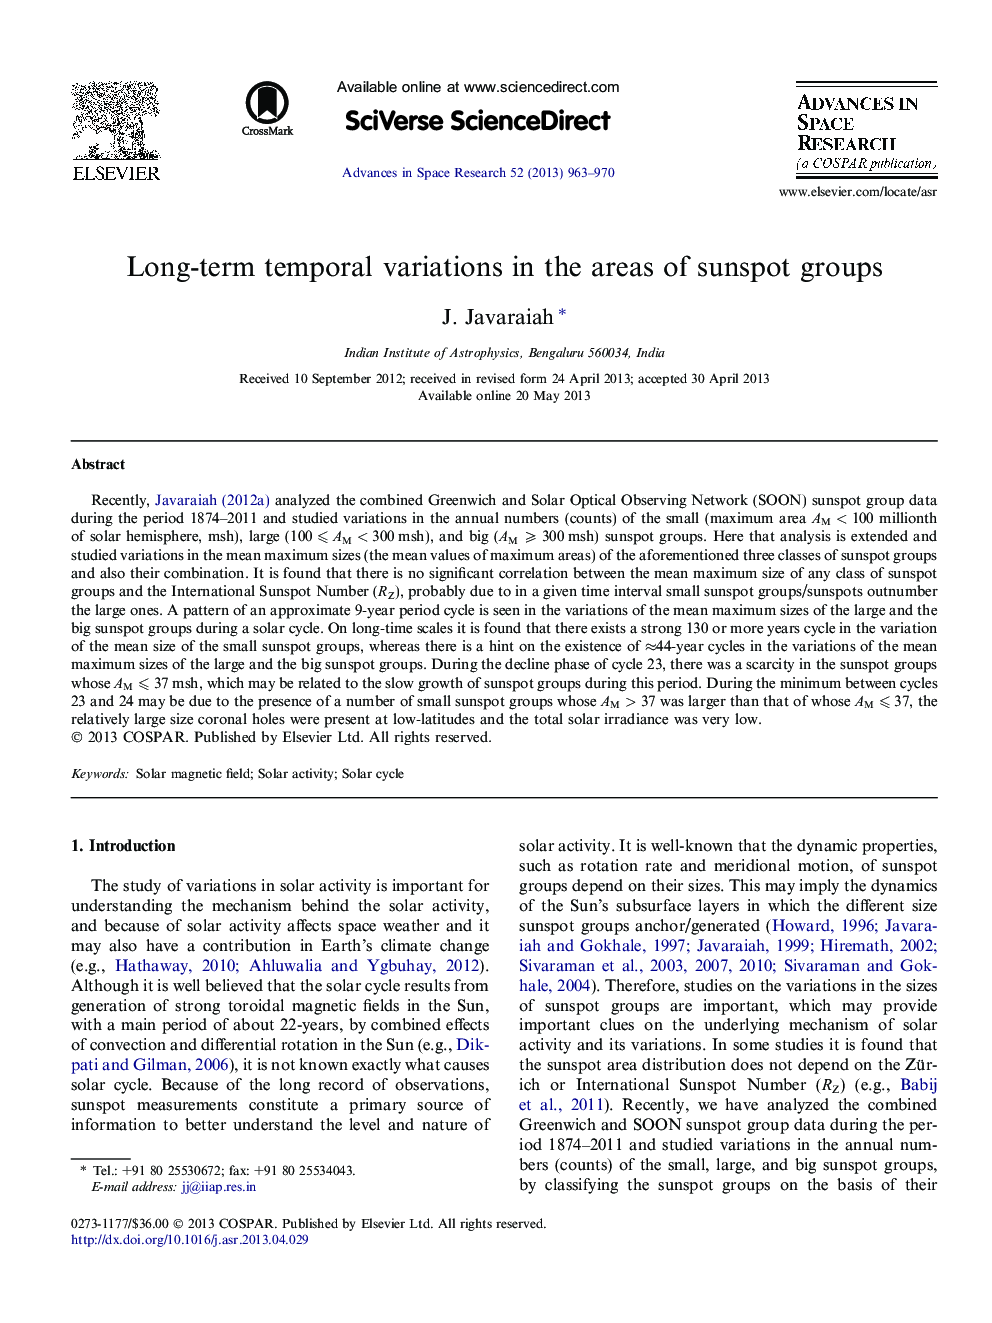 Long-term temporal variations in the areas of sunspot groups